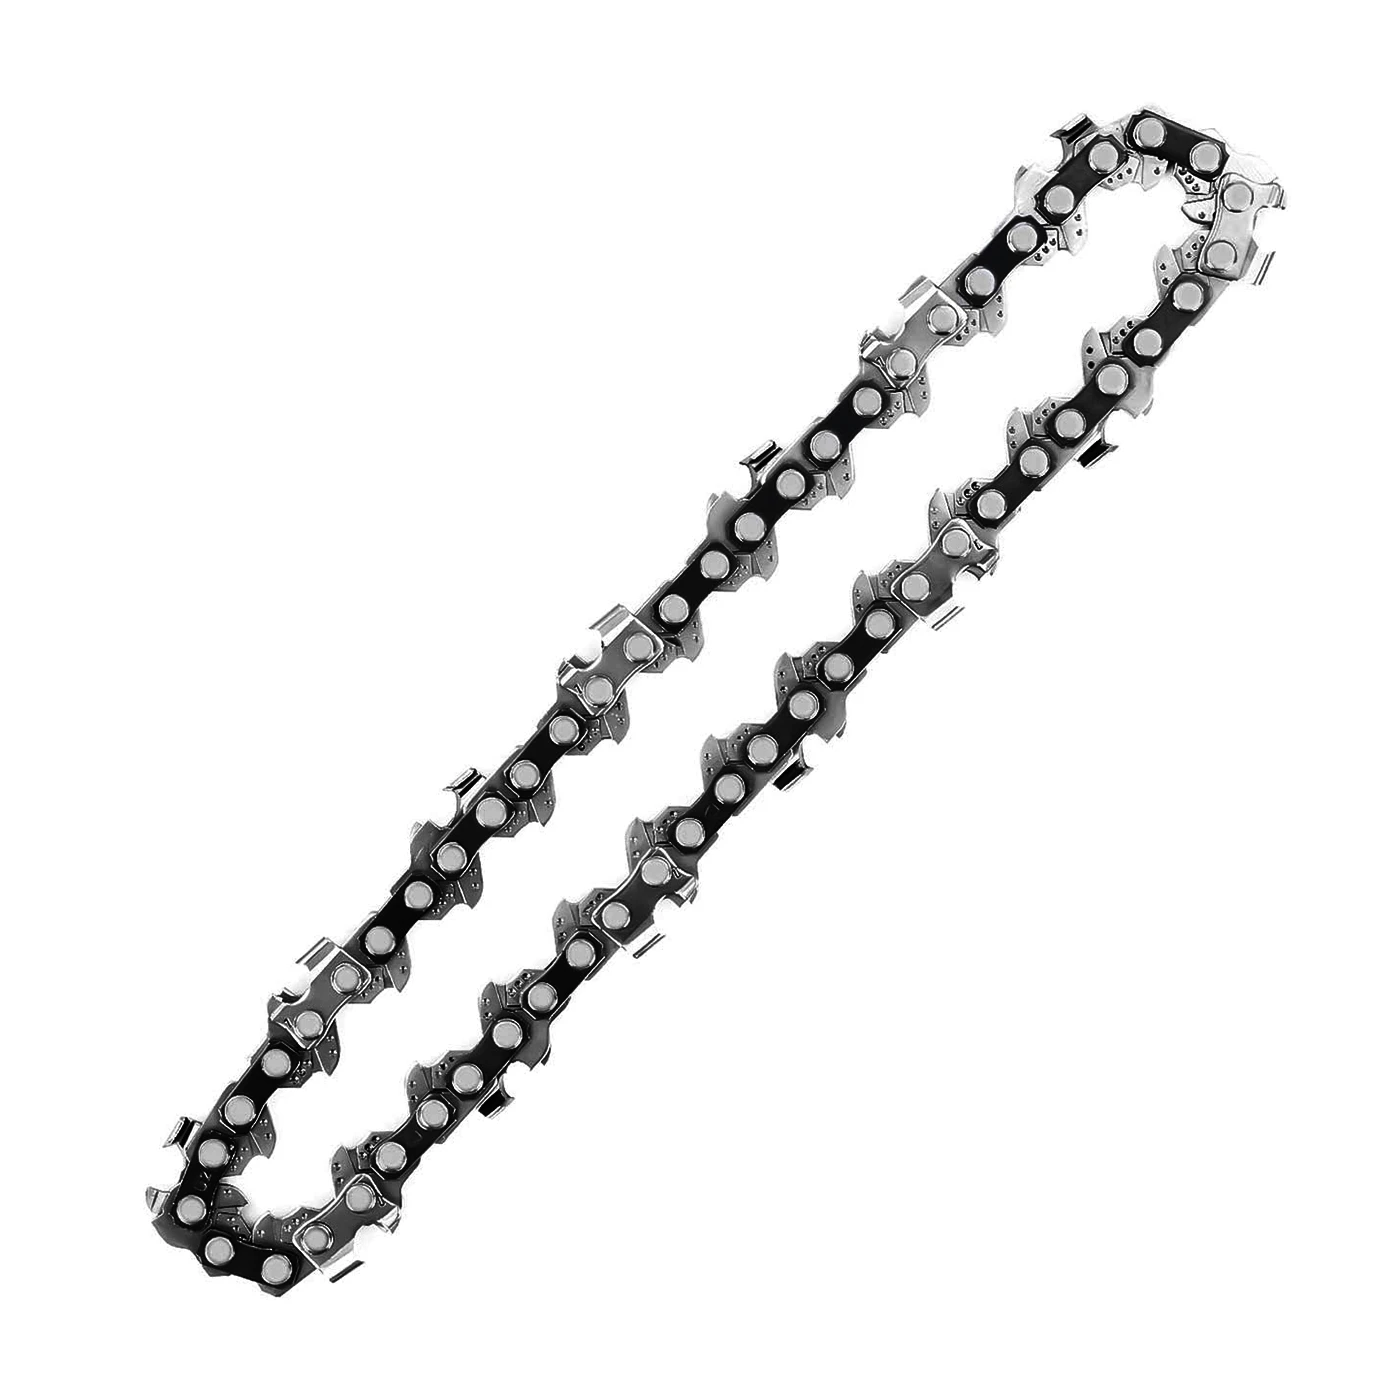 

4-Inch 1/4 inch Guide Saw Chain Mini Chainsaw Chain for 4 Inch Cordless Electric Protable Battery Handheld Chainsaw